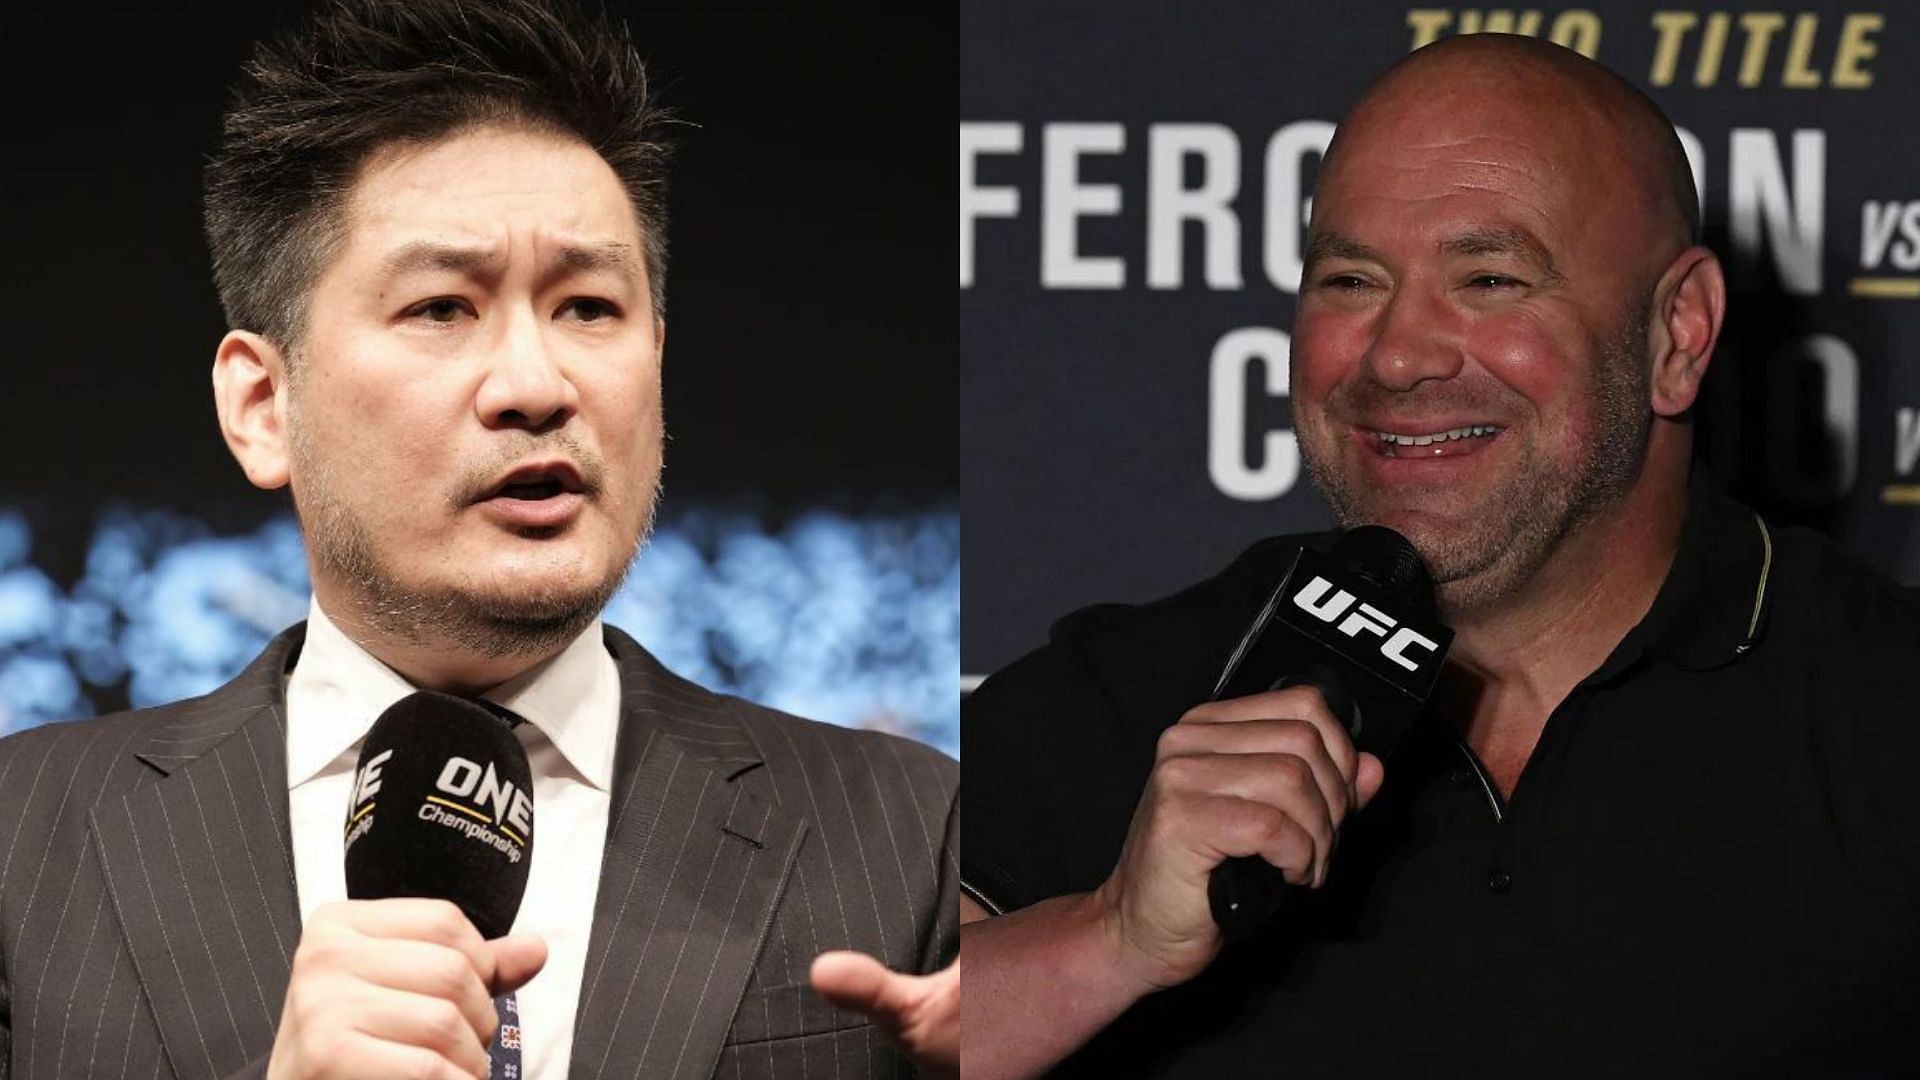 [Photo Credit: ONE Championship and Getty] Chatri Sityodtong and Dana White